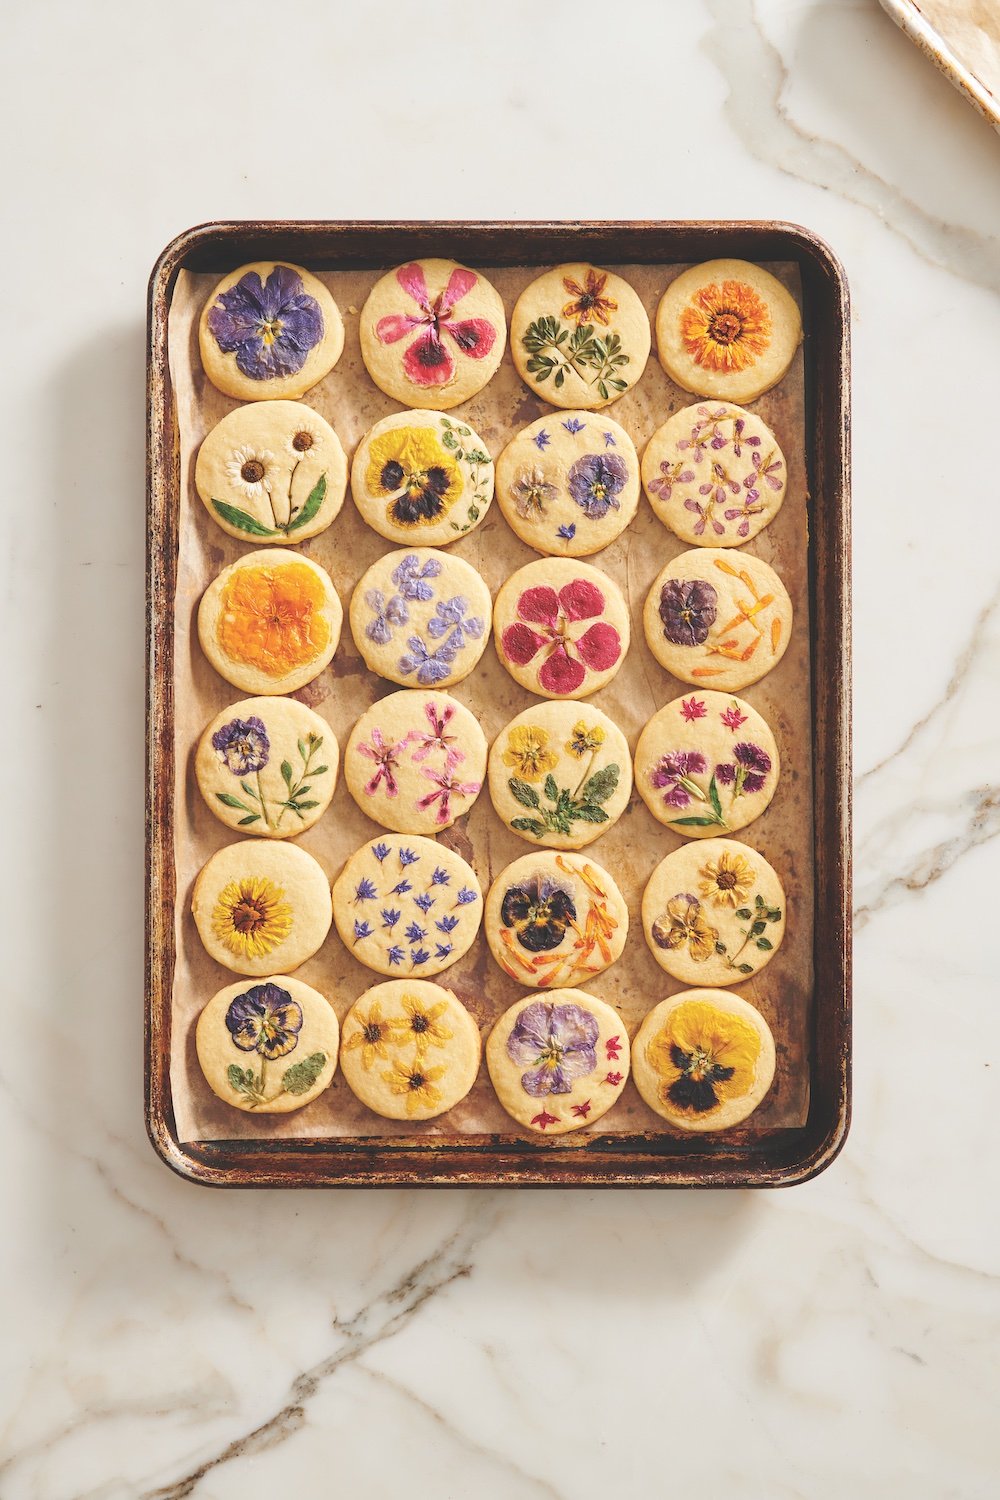 22 Edible Flower Recipes for Spring - Brit + Co